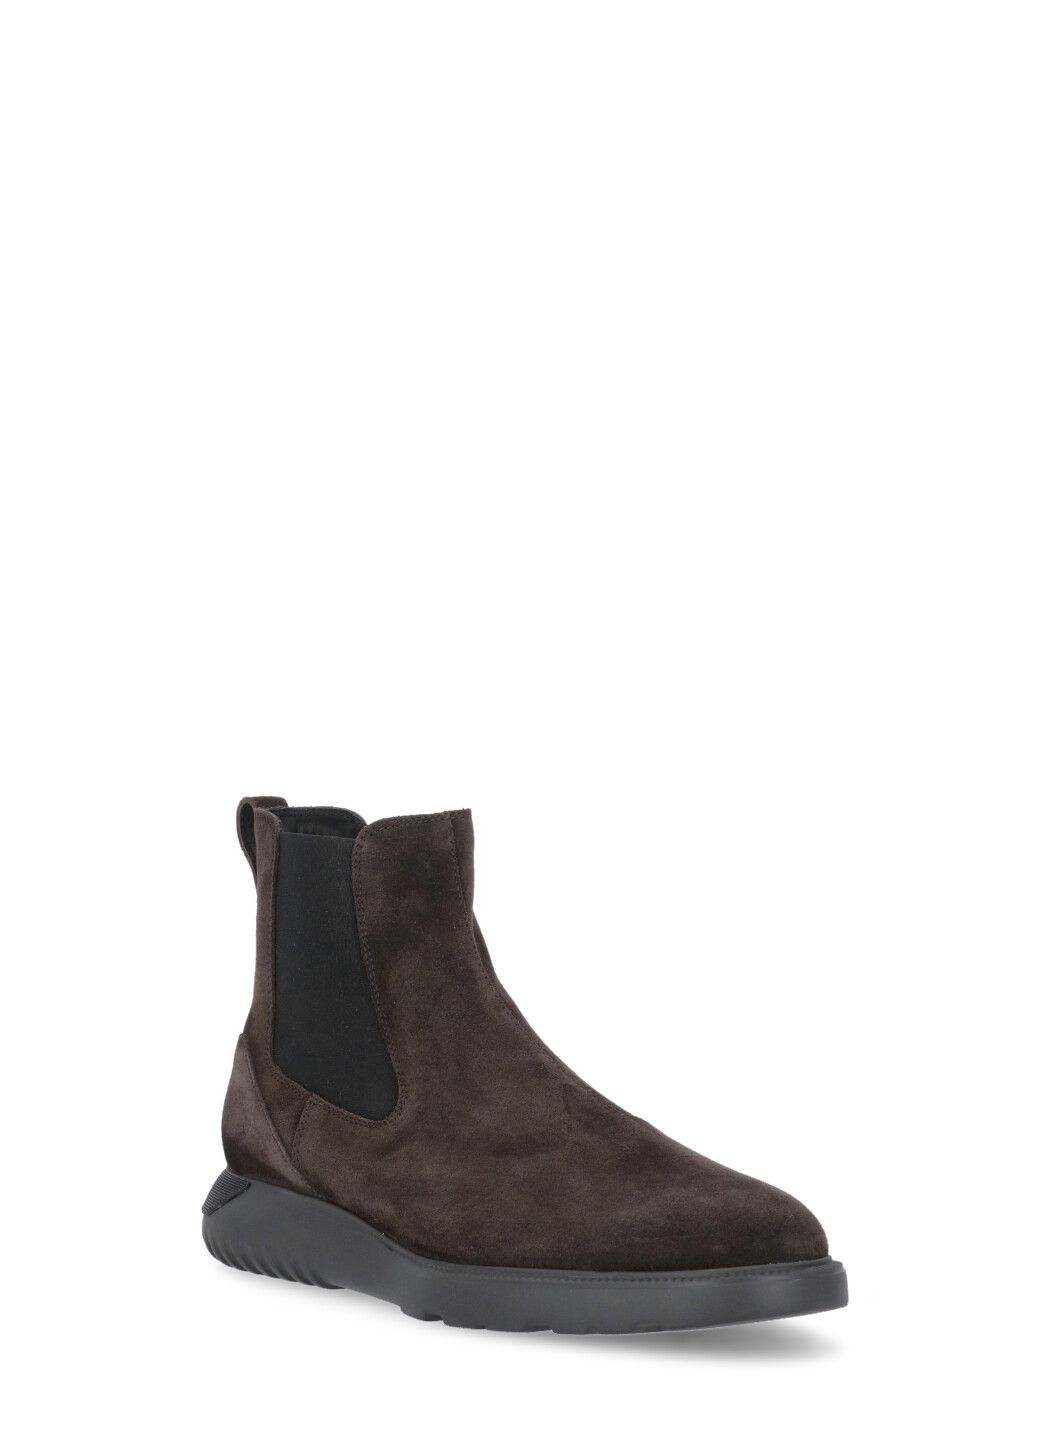 H600 Chelsea boots